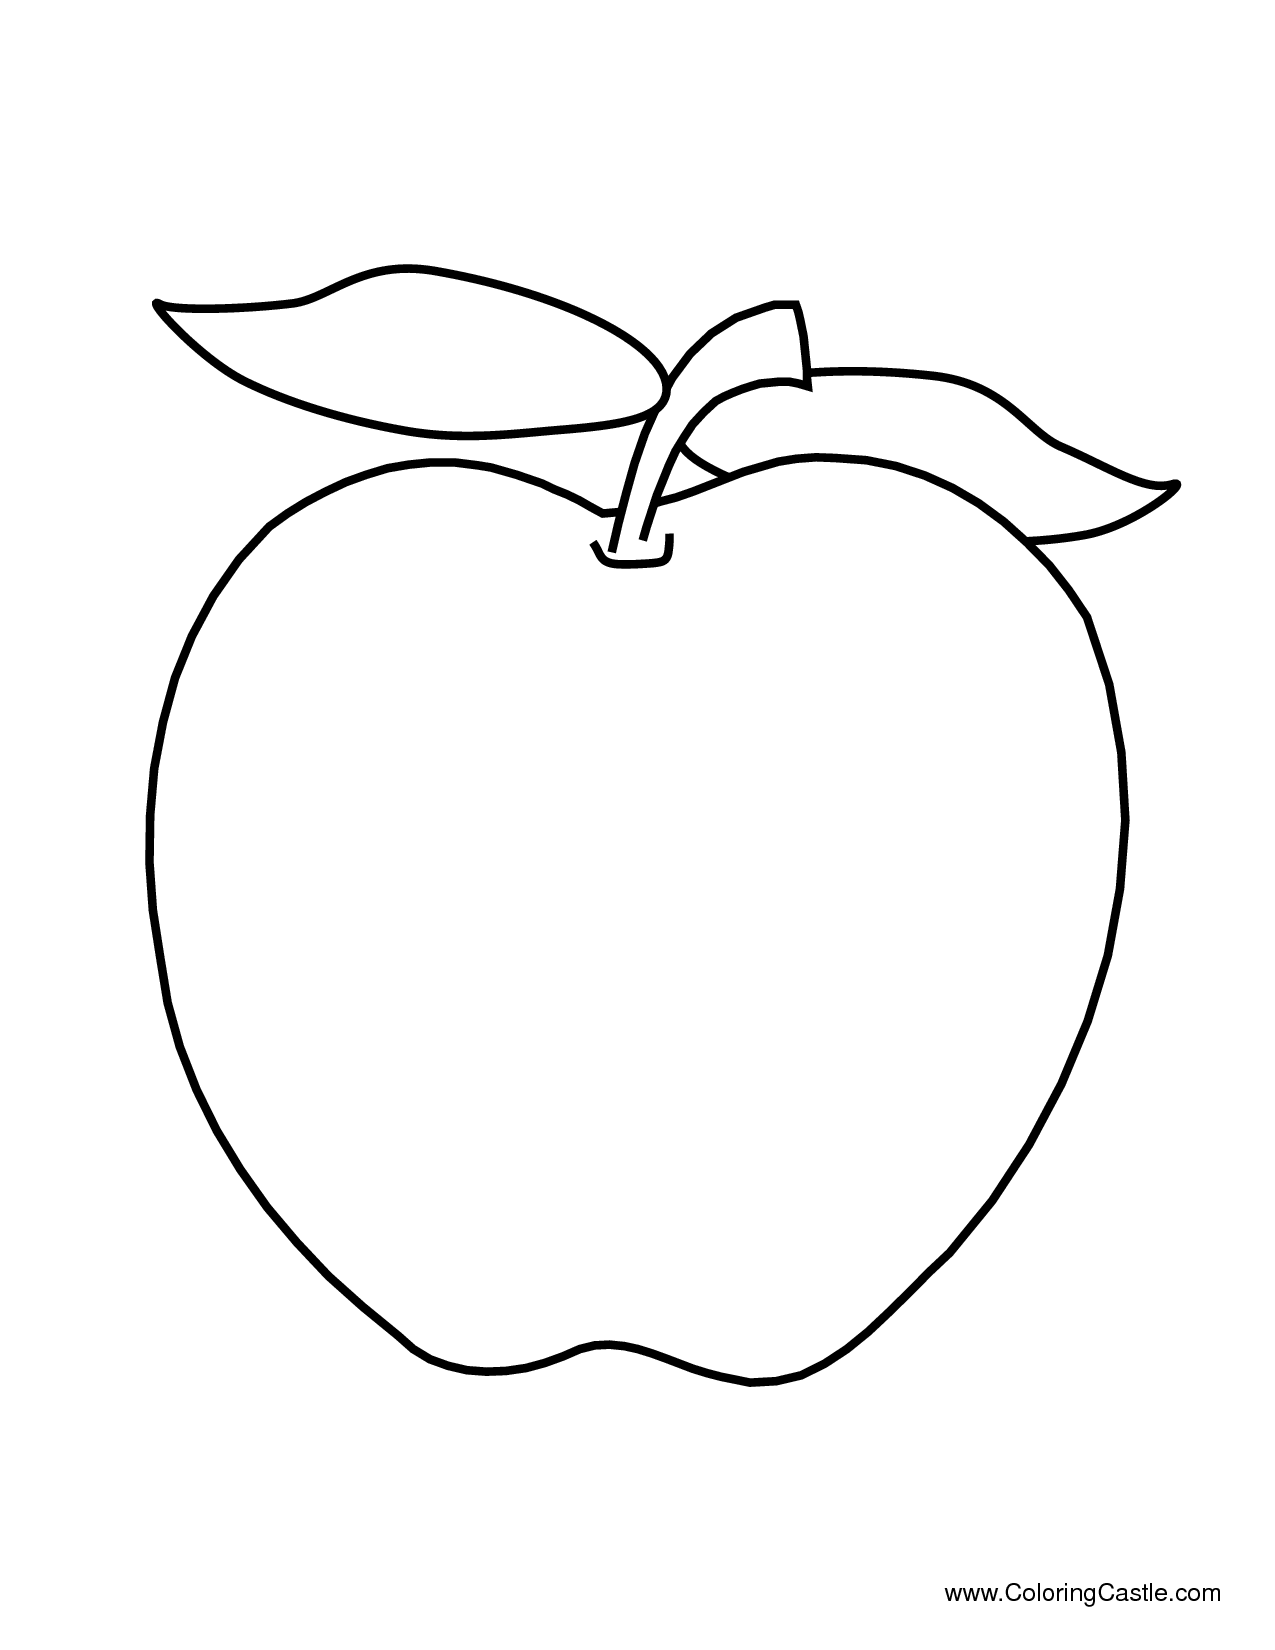 Free coloring pages of fruit templates